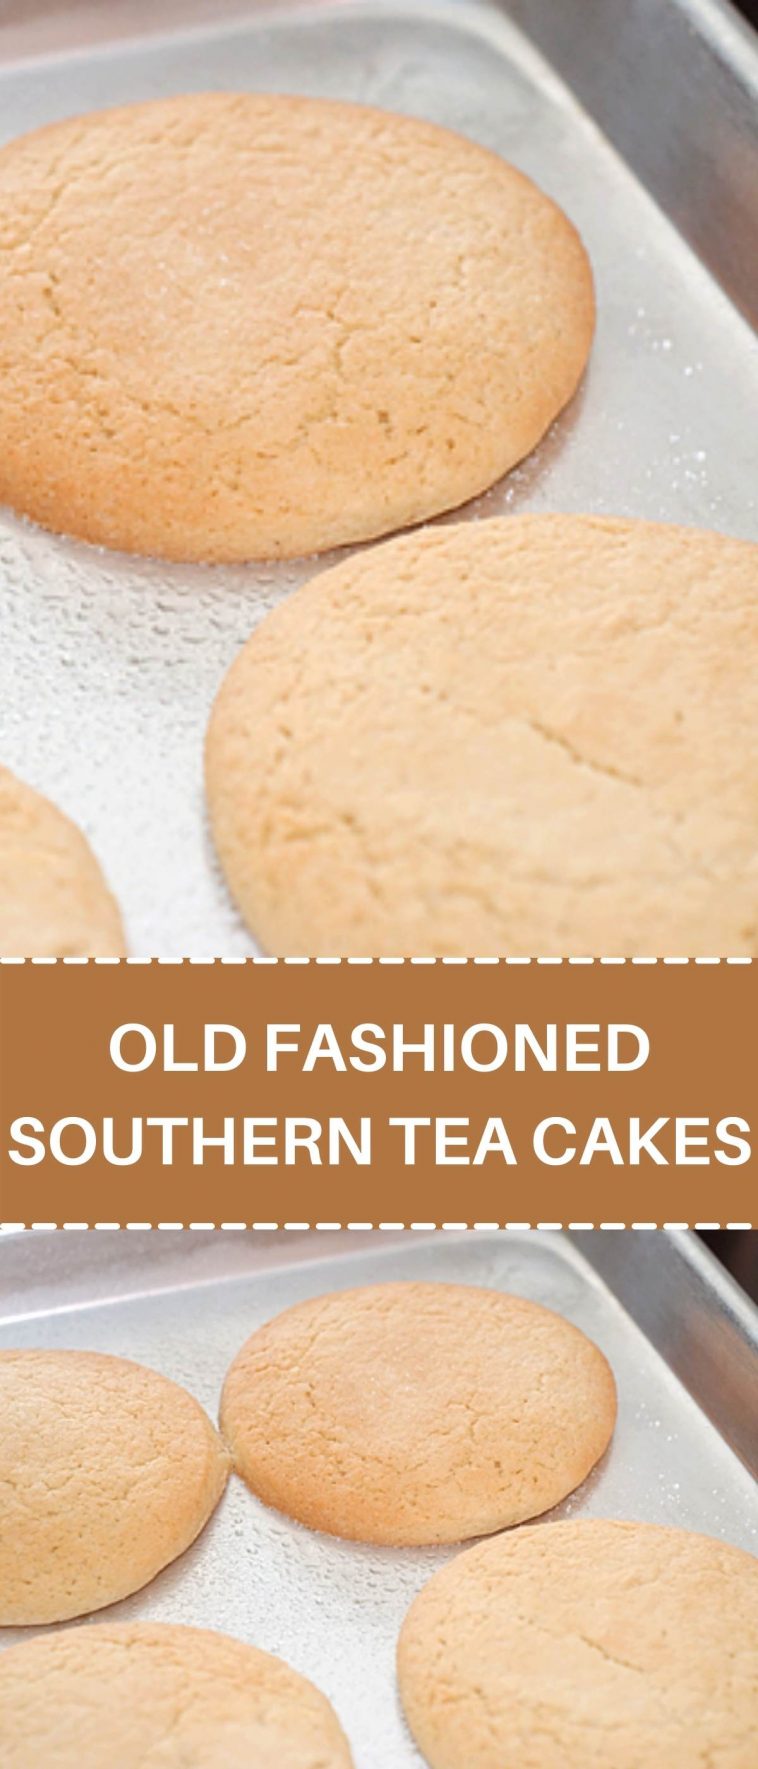 OLD FASHIONED SOUTHERN TEA CAKES